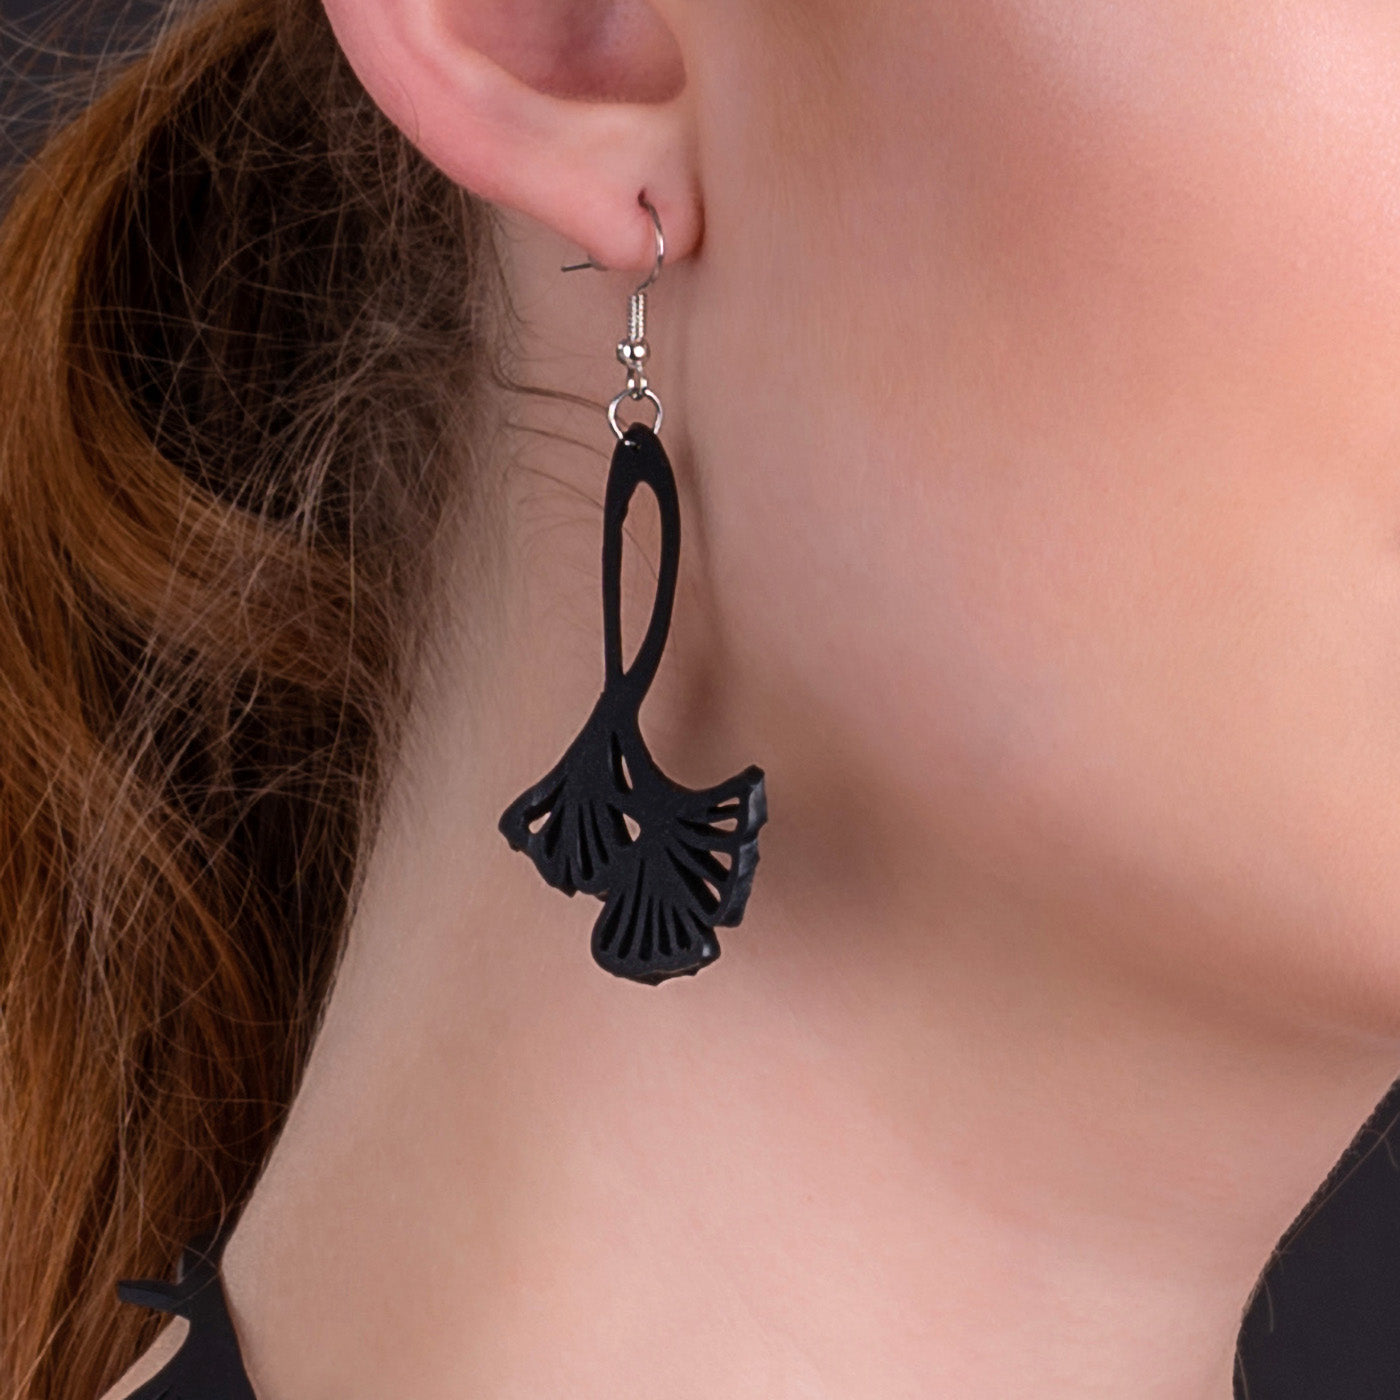 Fan Leaf Recycle Rubber Clover Earrings by Paguro Upcycle